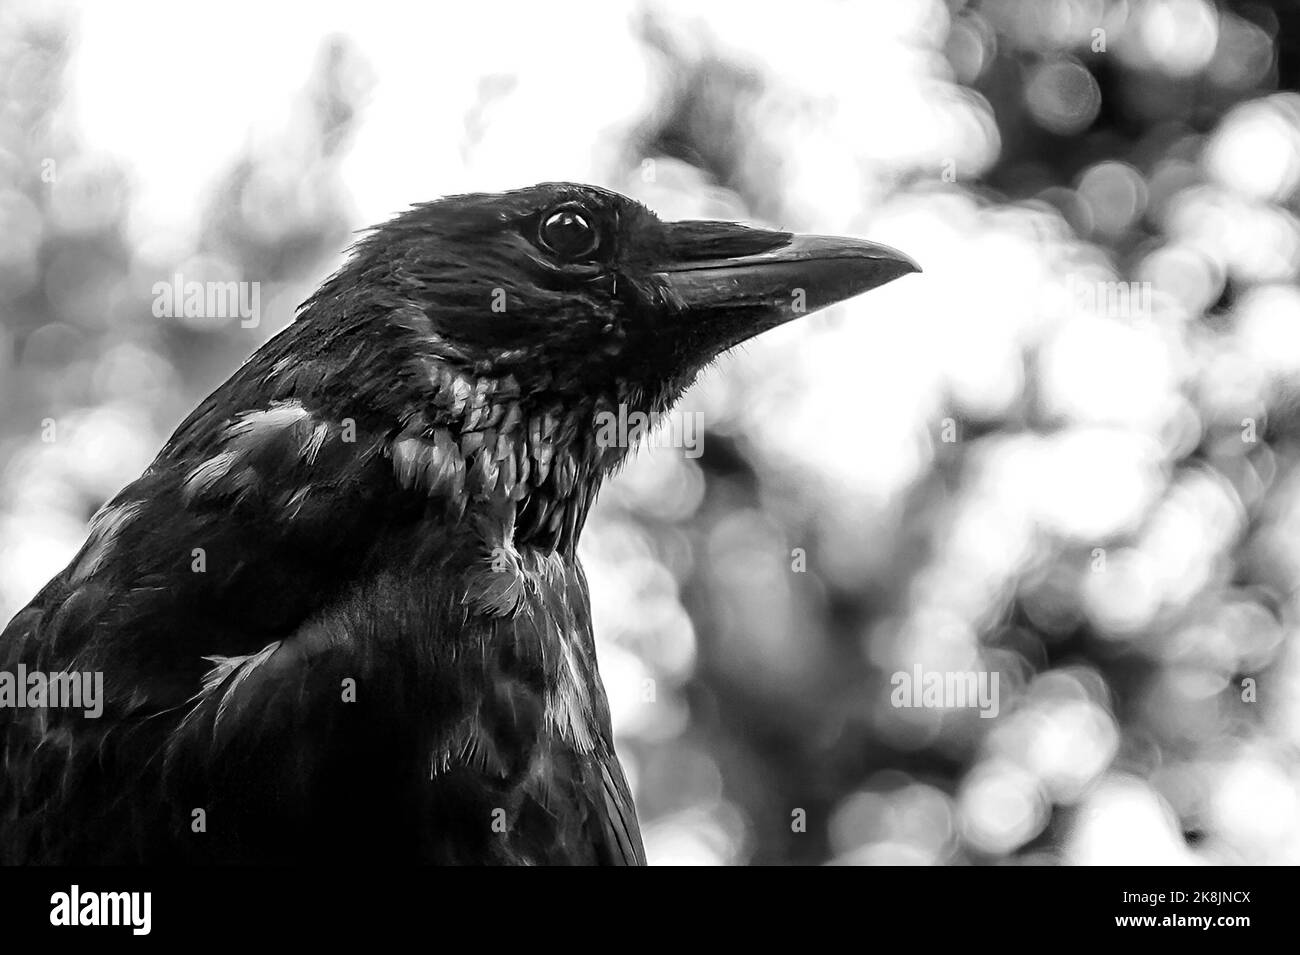 A close up in black and white of a Crow perched on a branch Stock Photo